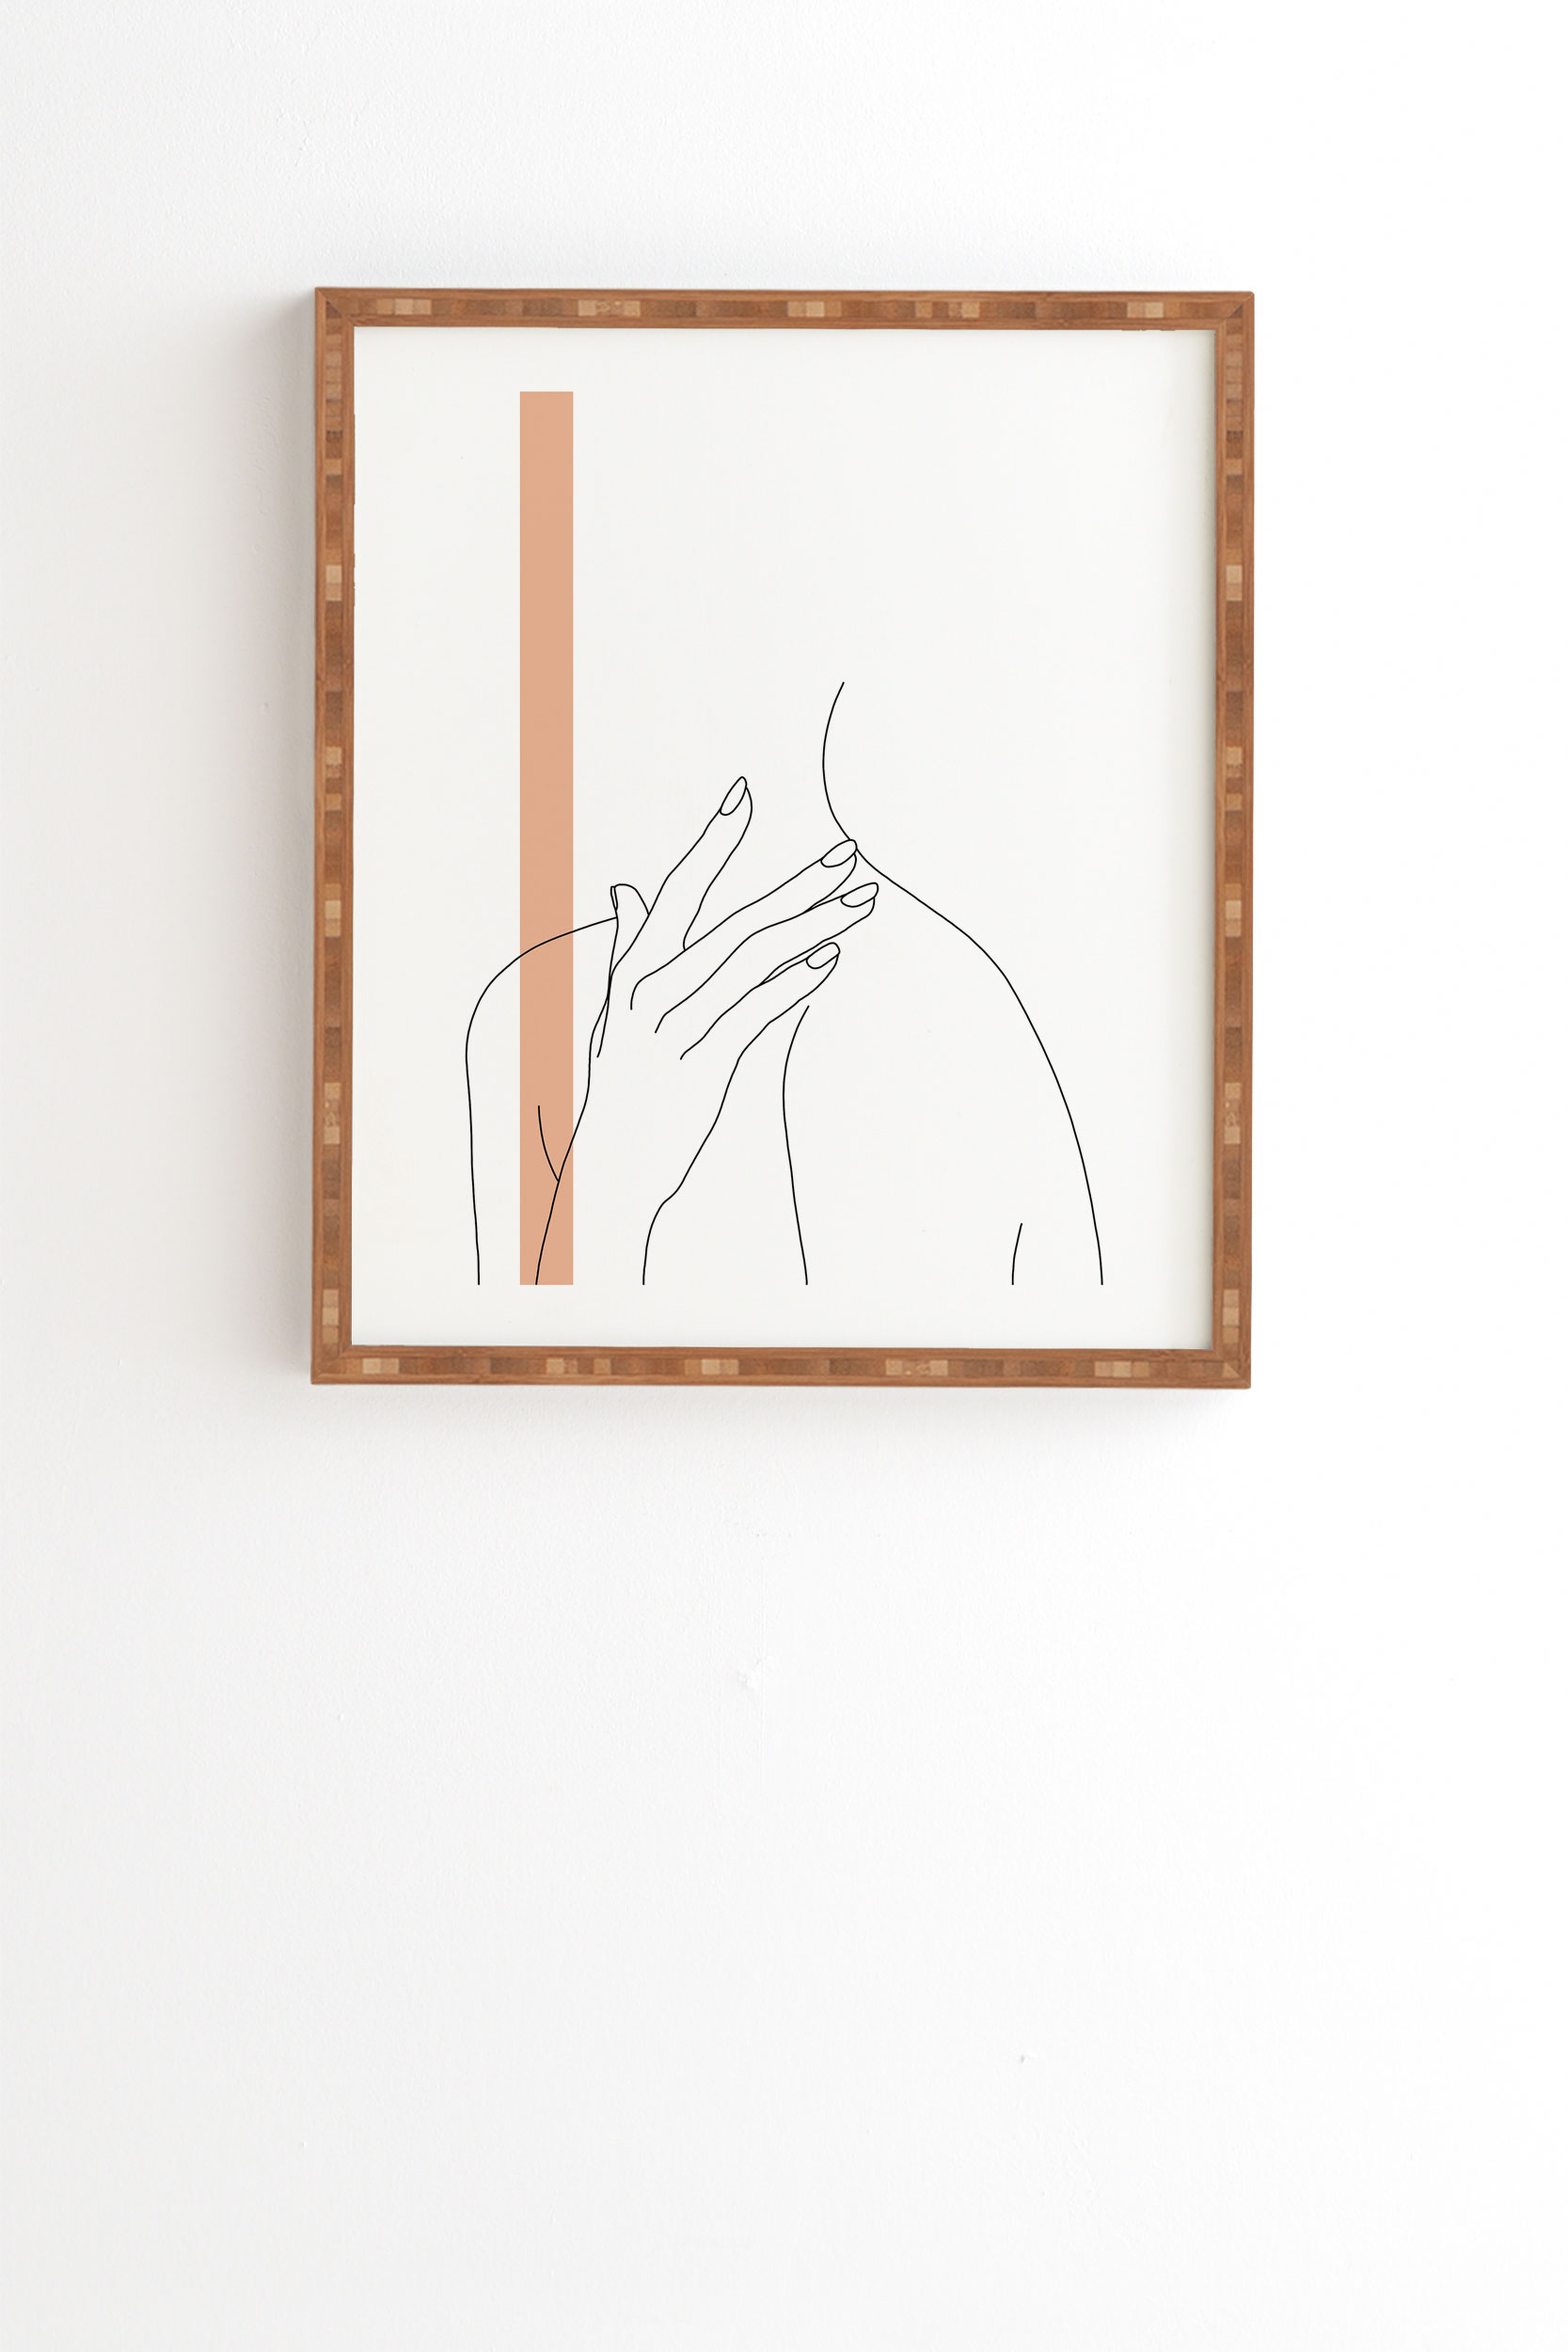 Illustration Danna Stripe by The Colour Study - Framed Wall Art Bamboo 19" x 22.4" - Wander Print Co.